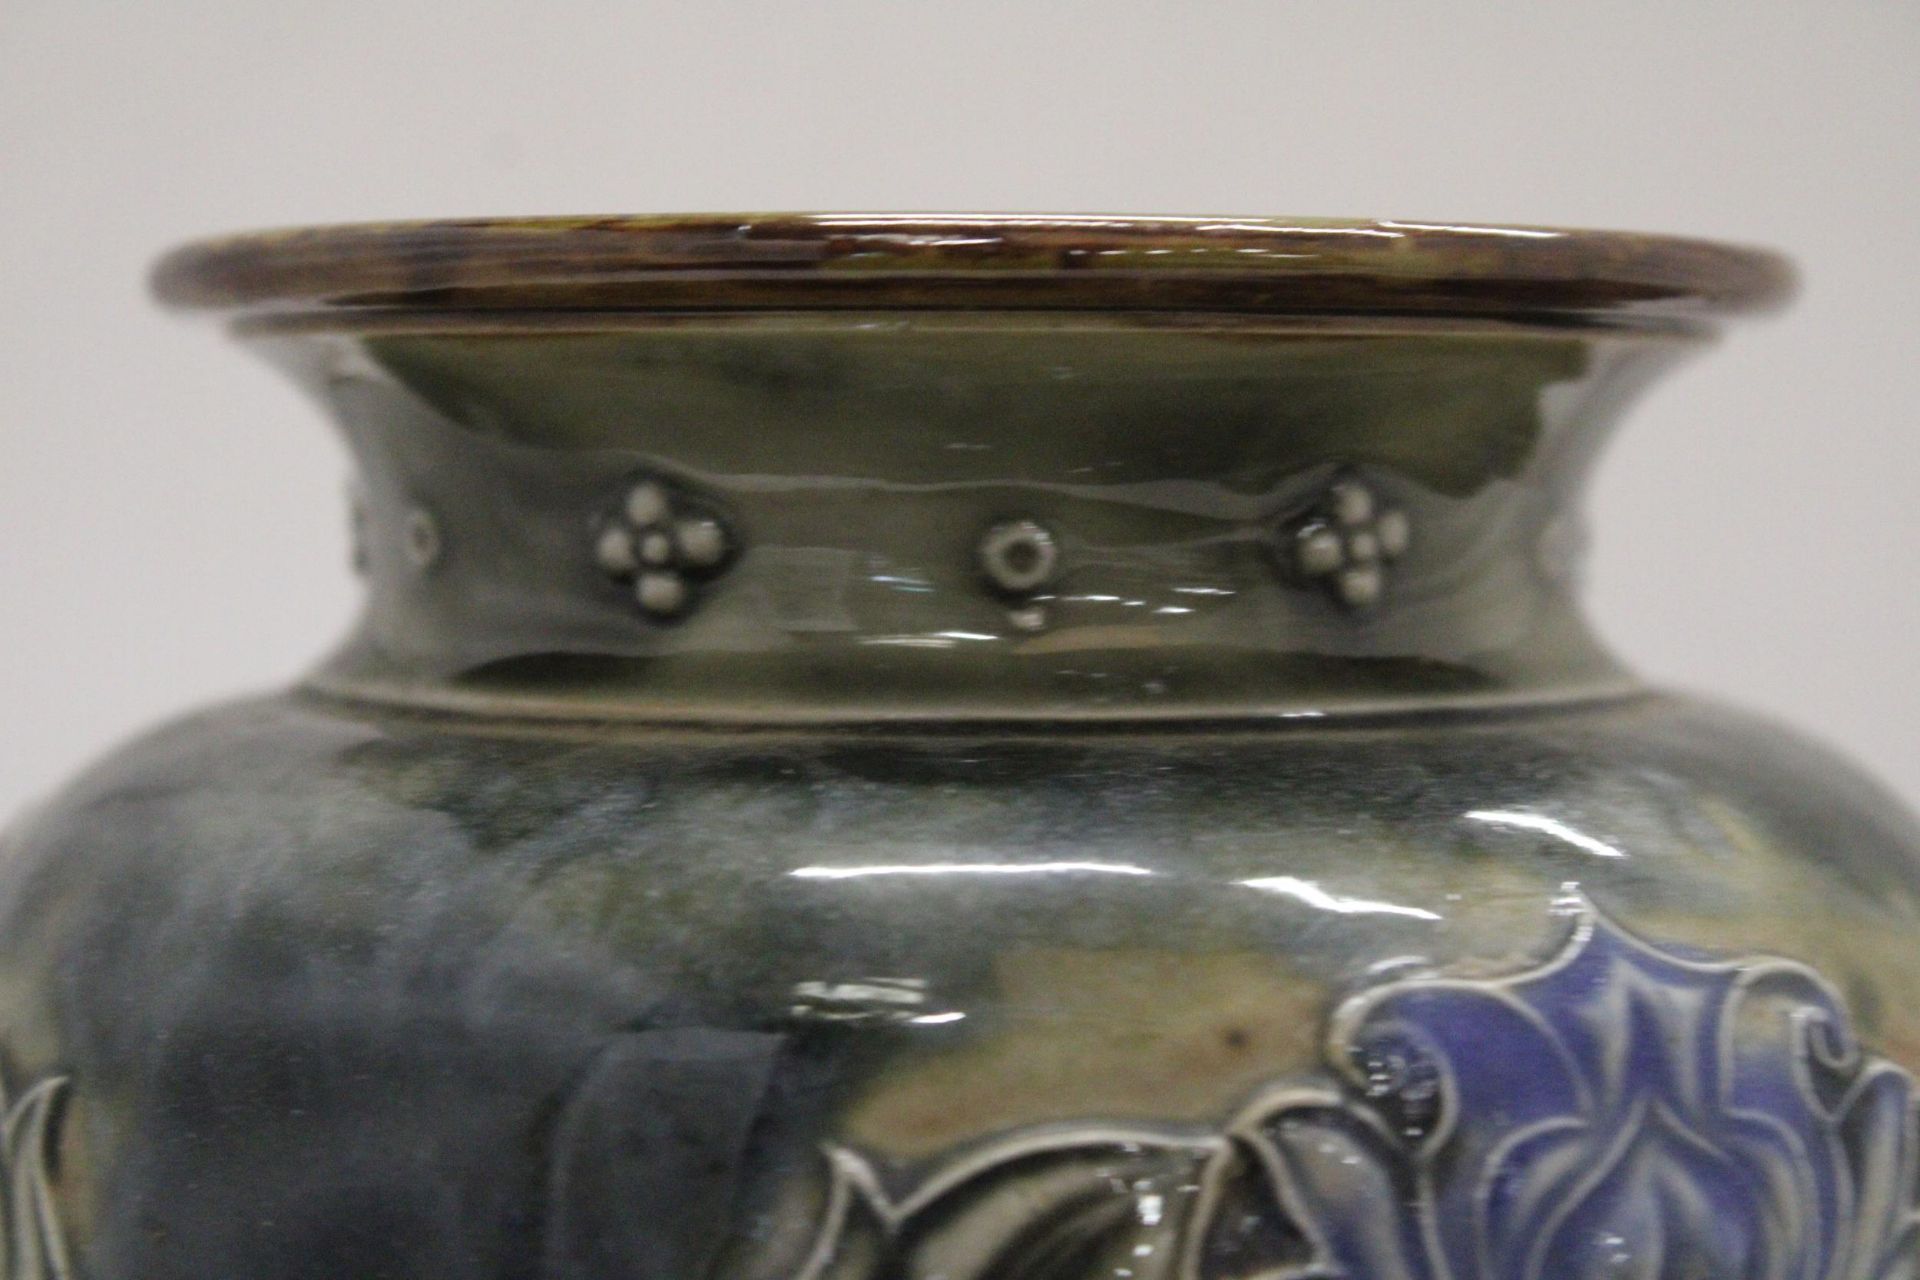 A PAIR OF ROYAL DOULTON LILY PARTINGTON ART NOUVEAU STYLE VASES WITH RELIEF FLOWERS - Image 6 of 7